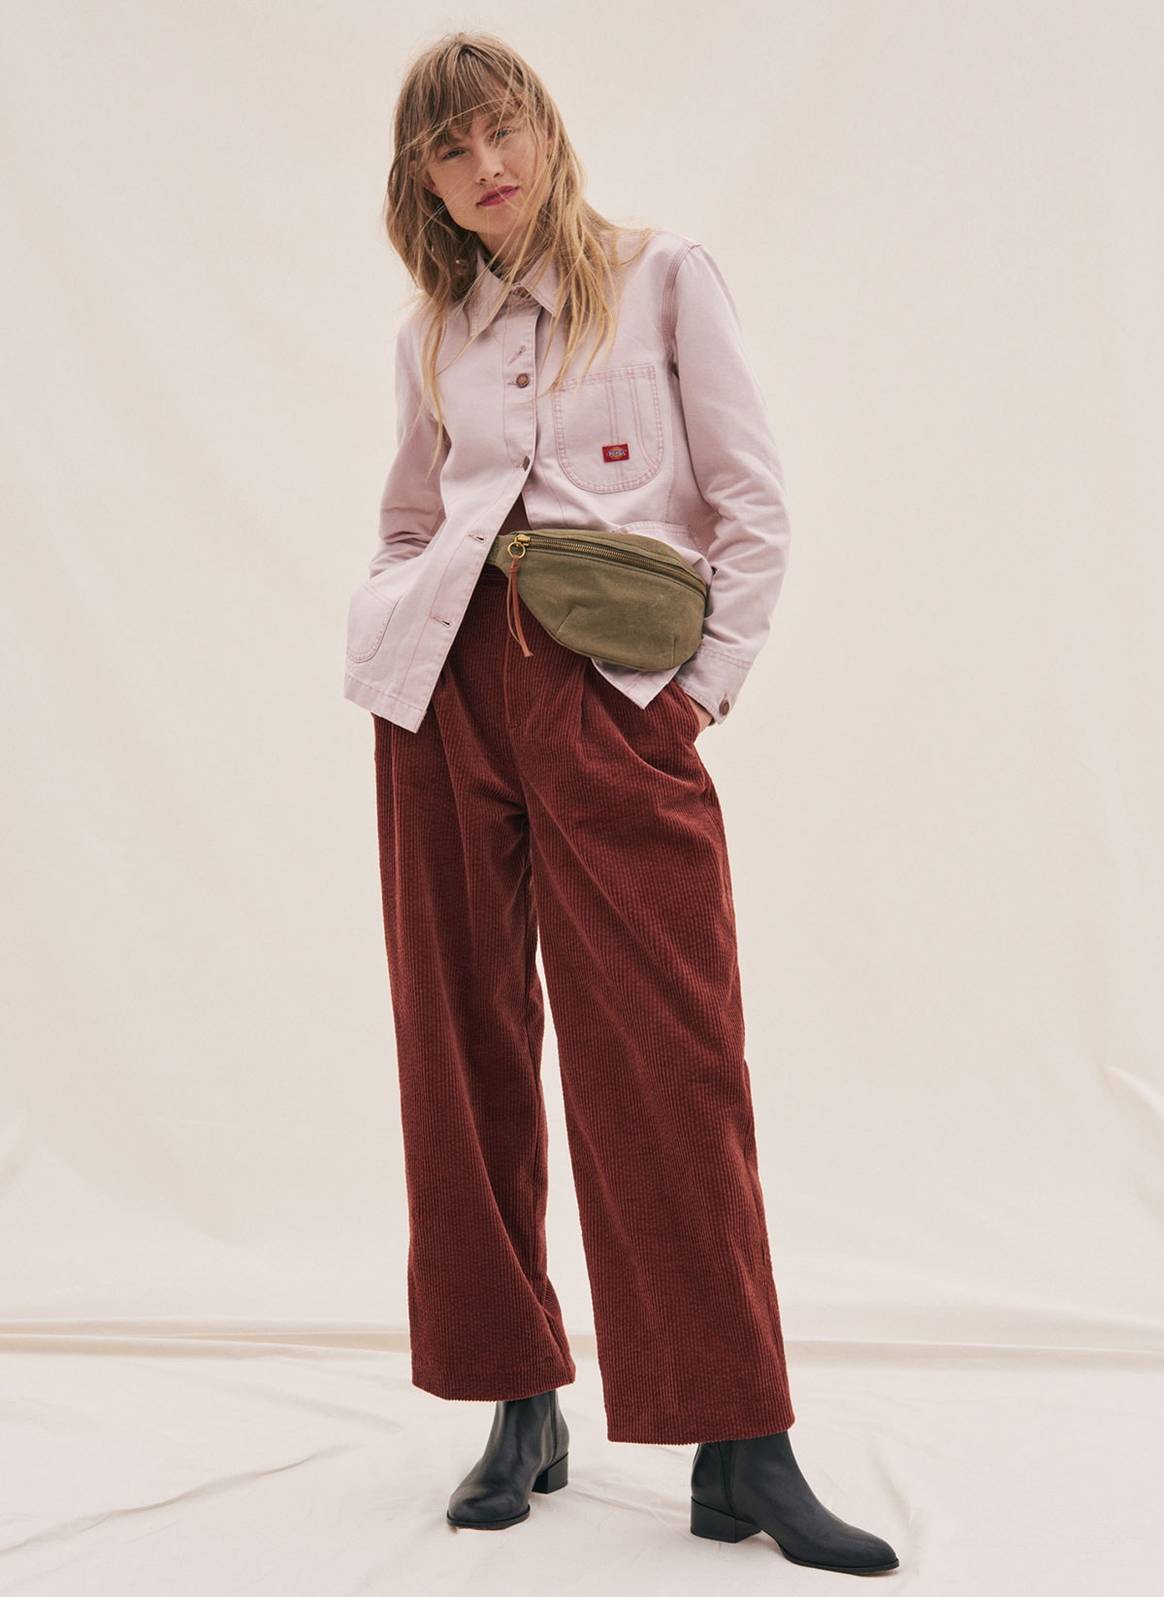 Madewell launches workwear capsule with Dickies